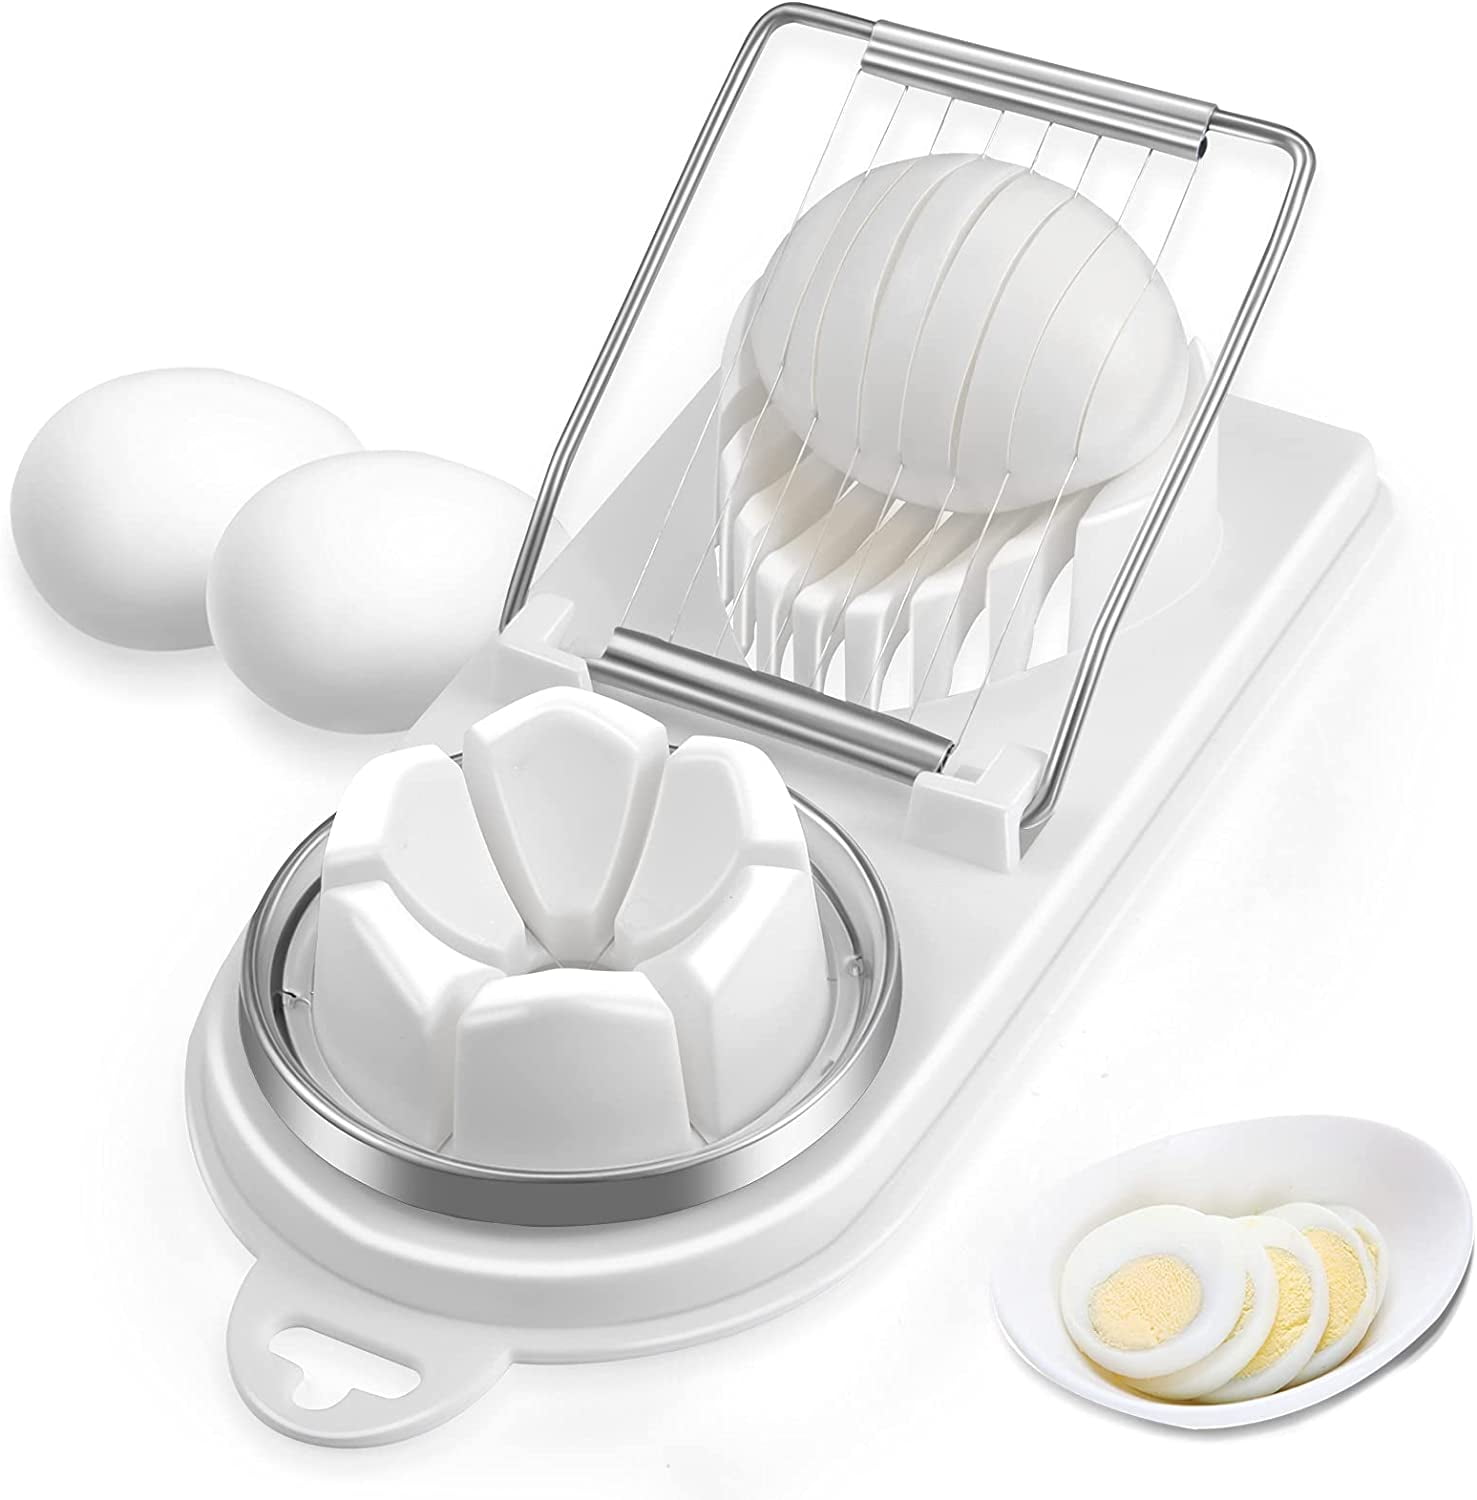 Made From Stainless Steel Metal For Added Durability for Hard Boiled Eggs Slice Hard Boiled Eggs Quickly and Effectively Metal Egg Slicer Cutter 